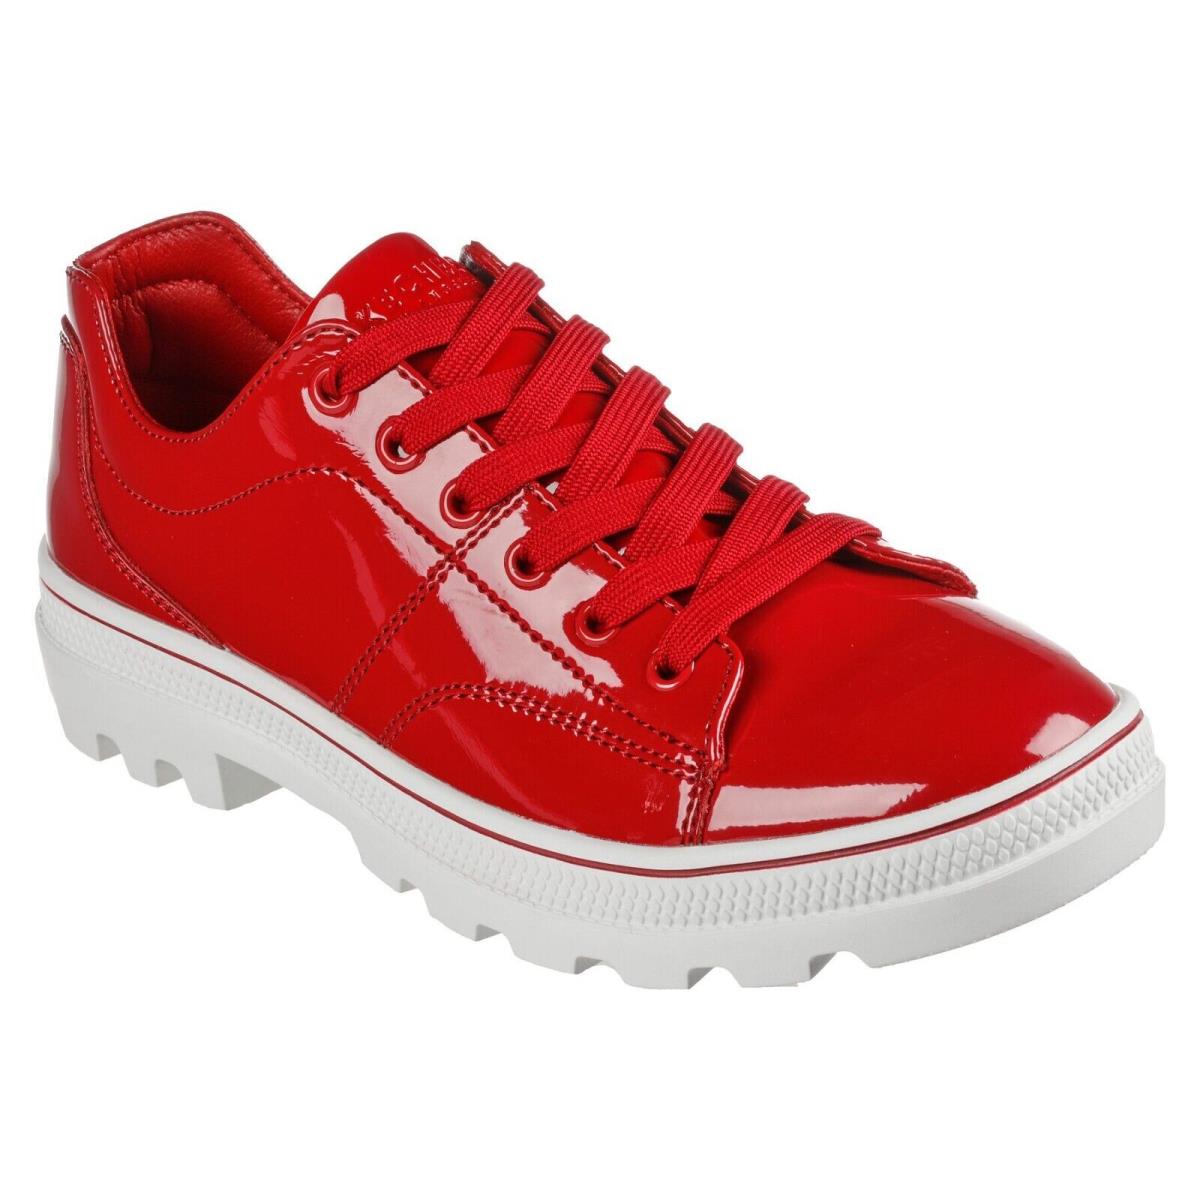 Women`s Skechers Street Roadies 90SBBY Casual Shoes 155201 /red Multi Sizes Red